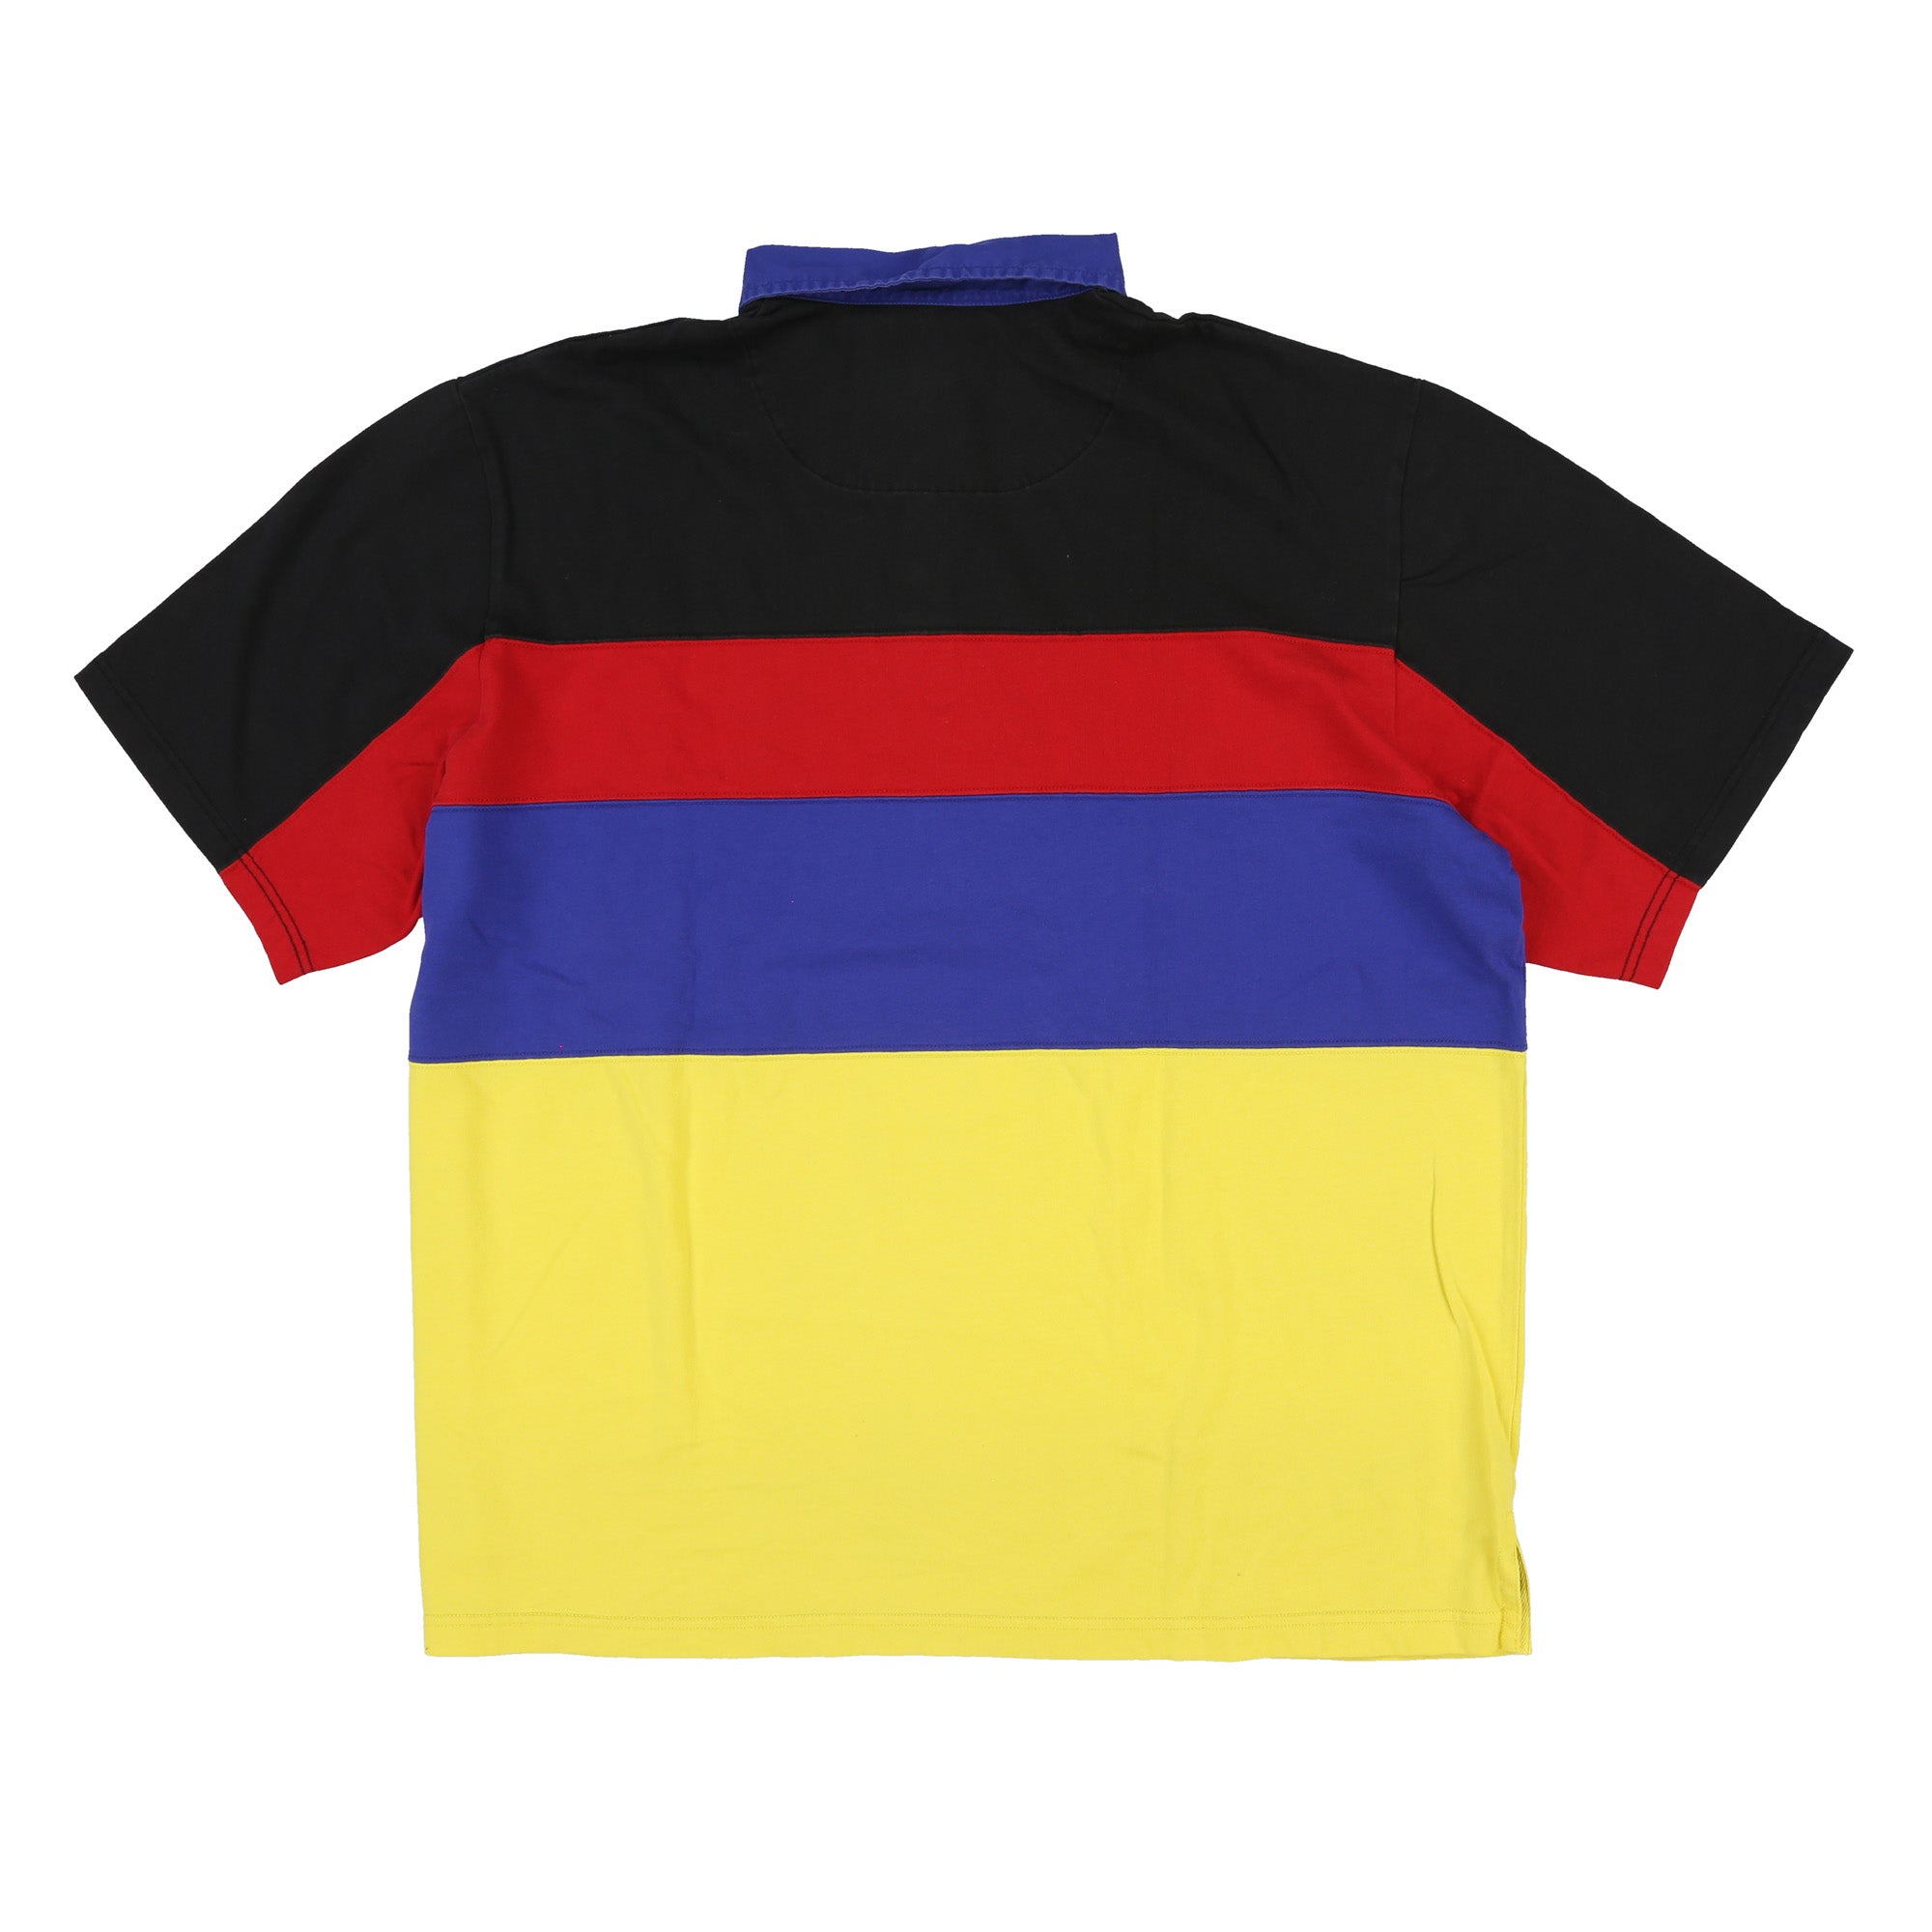 POLO SPORT SPELL OUT BLOCK COLOR POLO // BLACK RED BLUE YELLOW